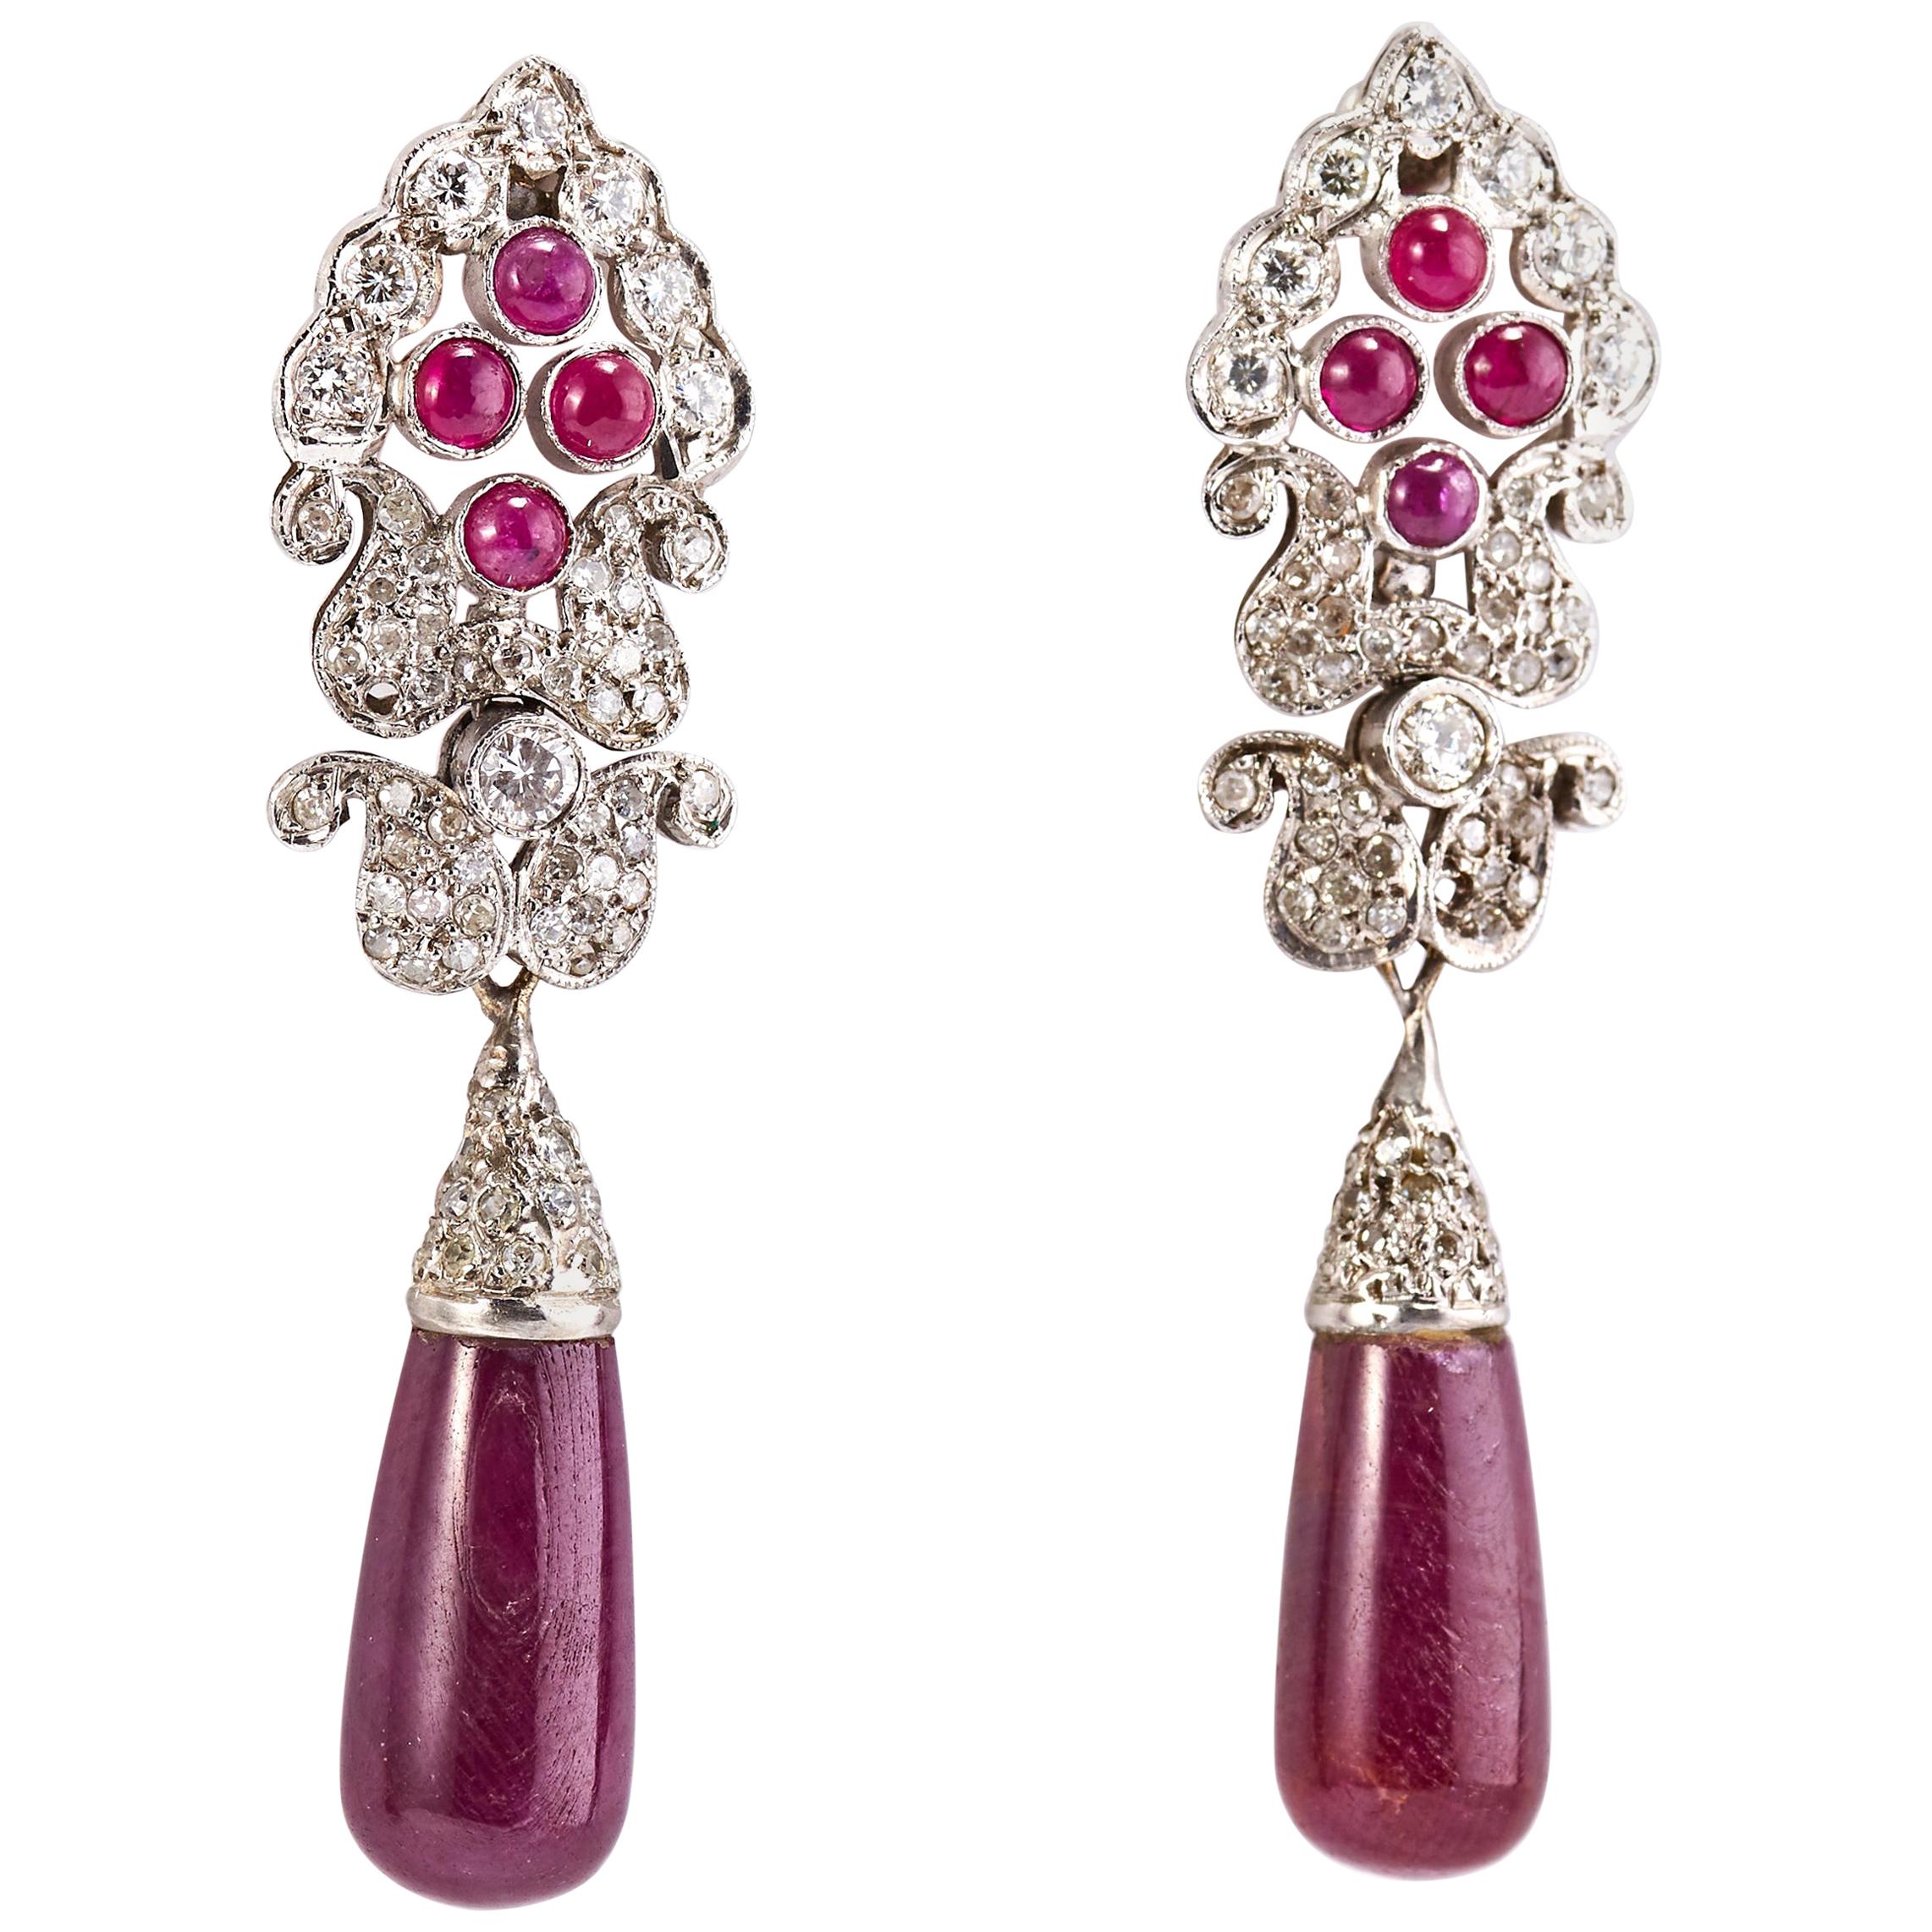 Pair of 14 Karat White Gold Earrings with Ruby and Diamonds